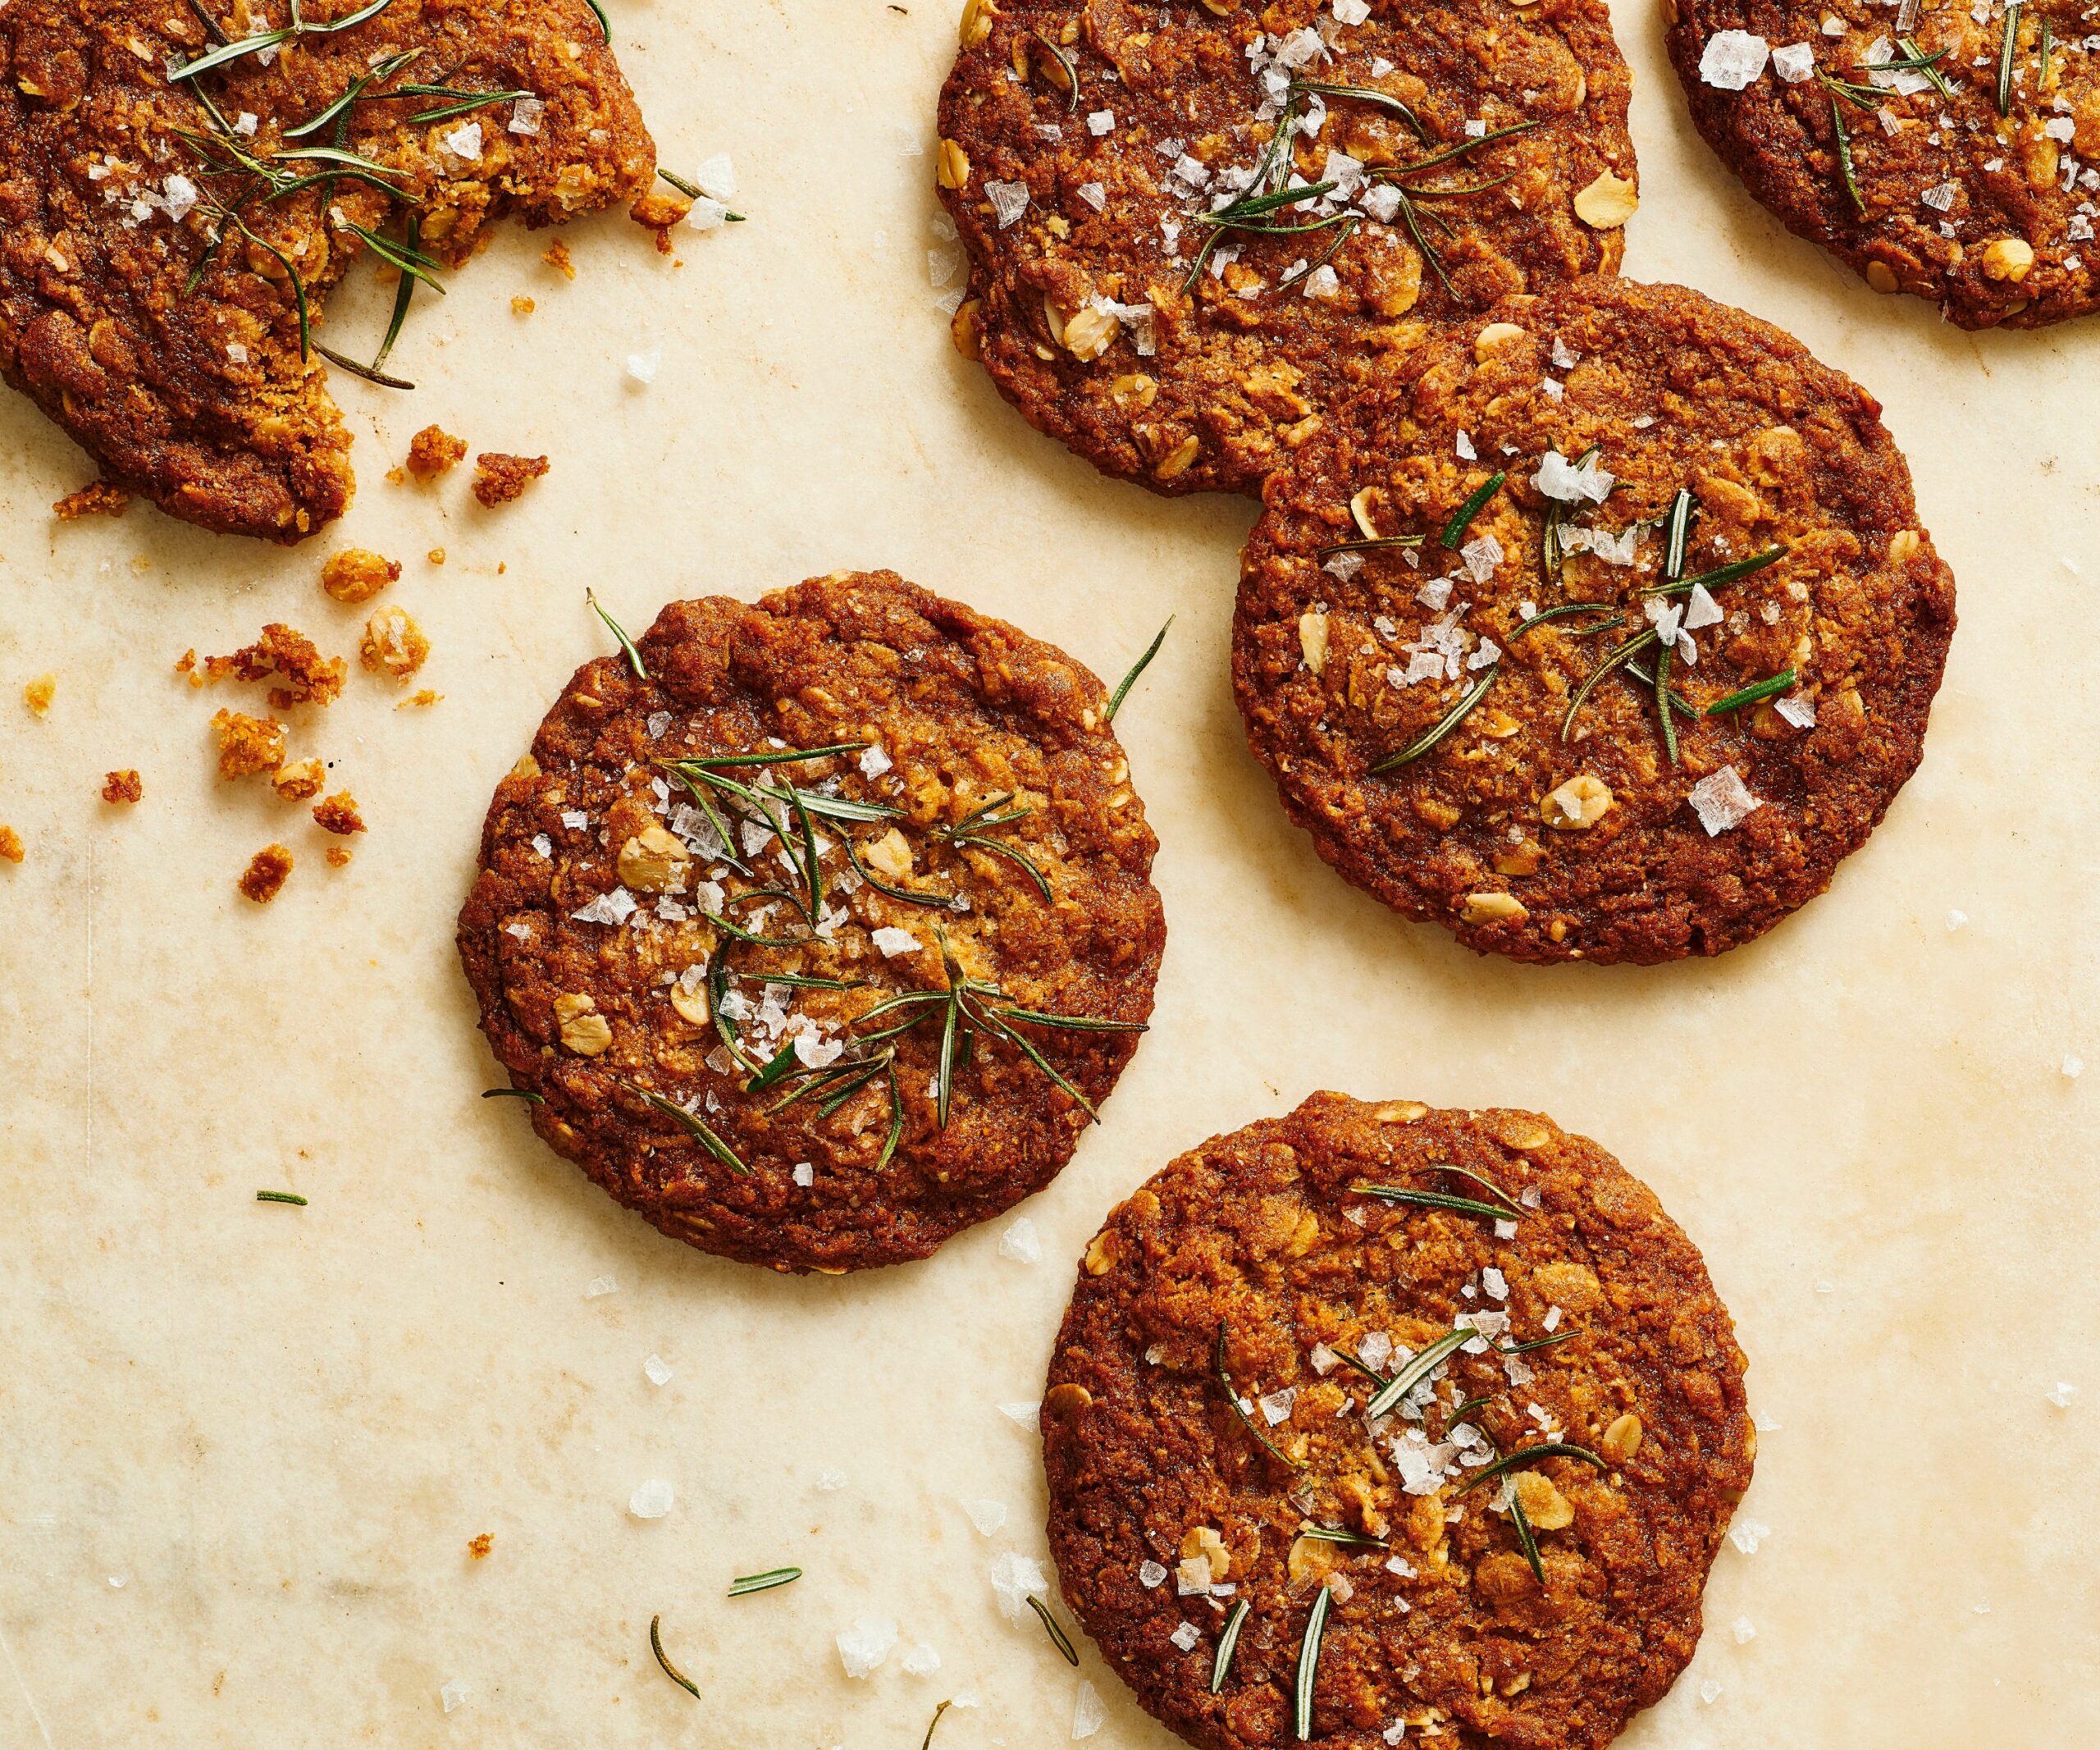 Anzac biscuits with salted rosemary